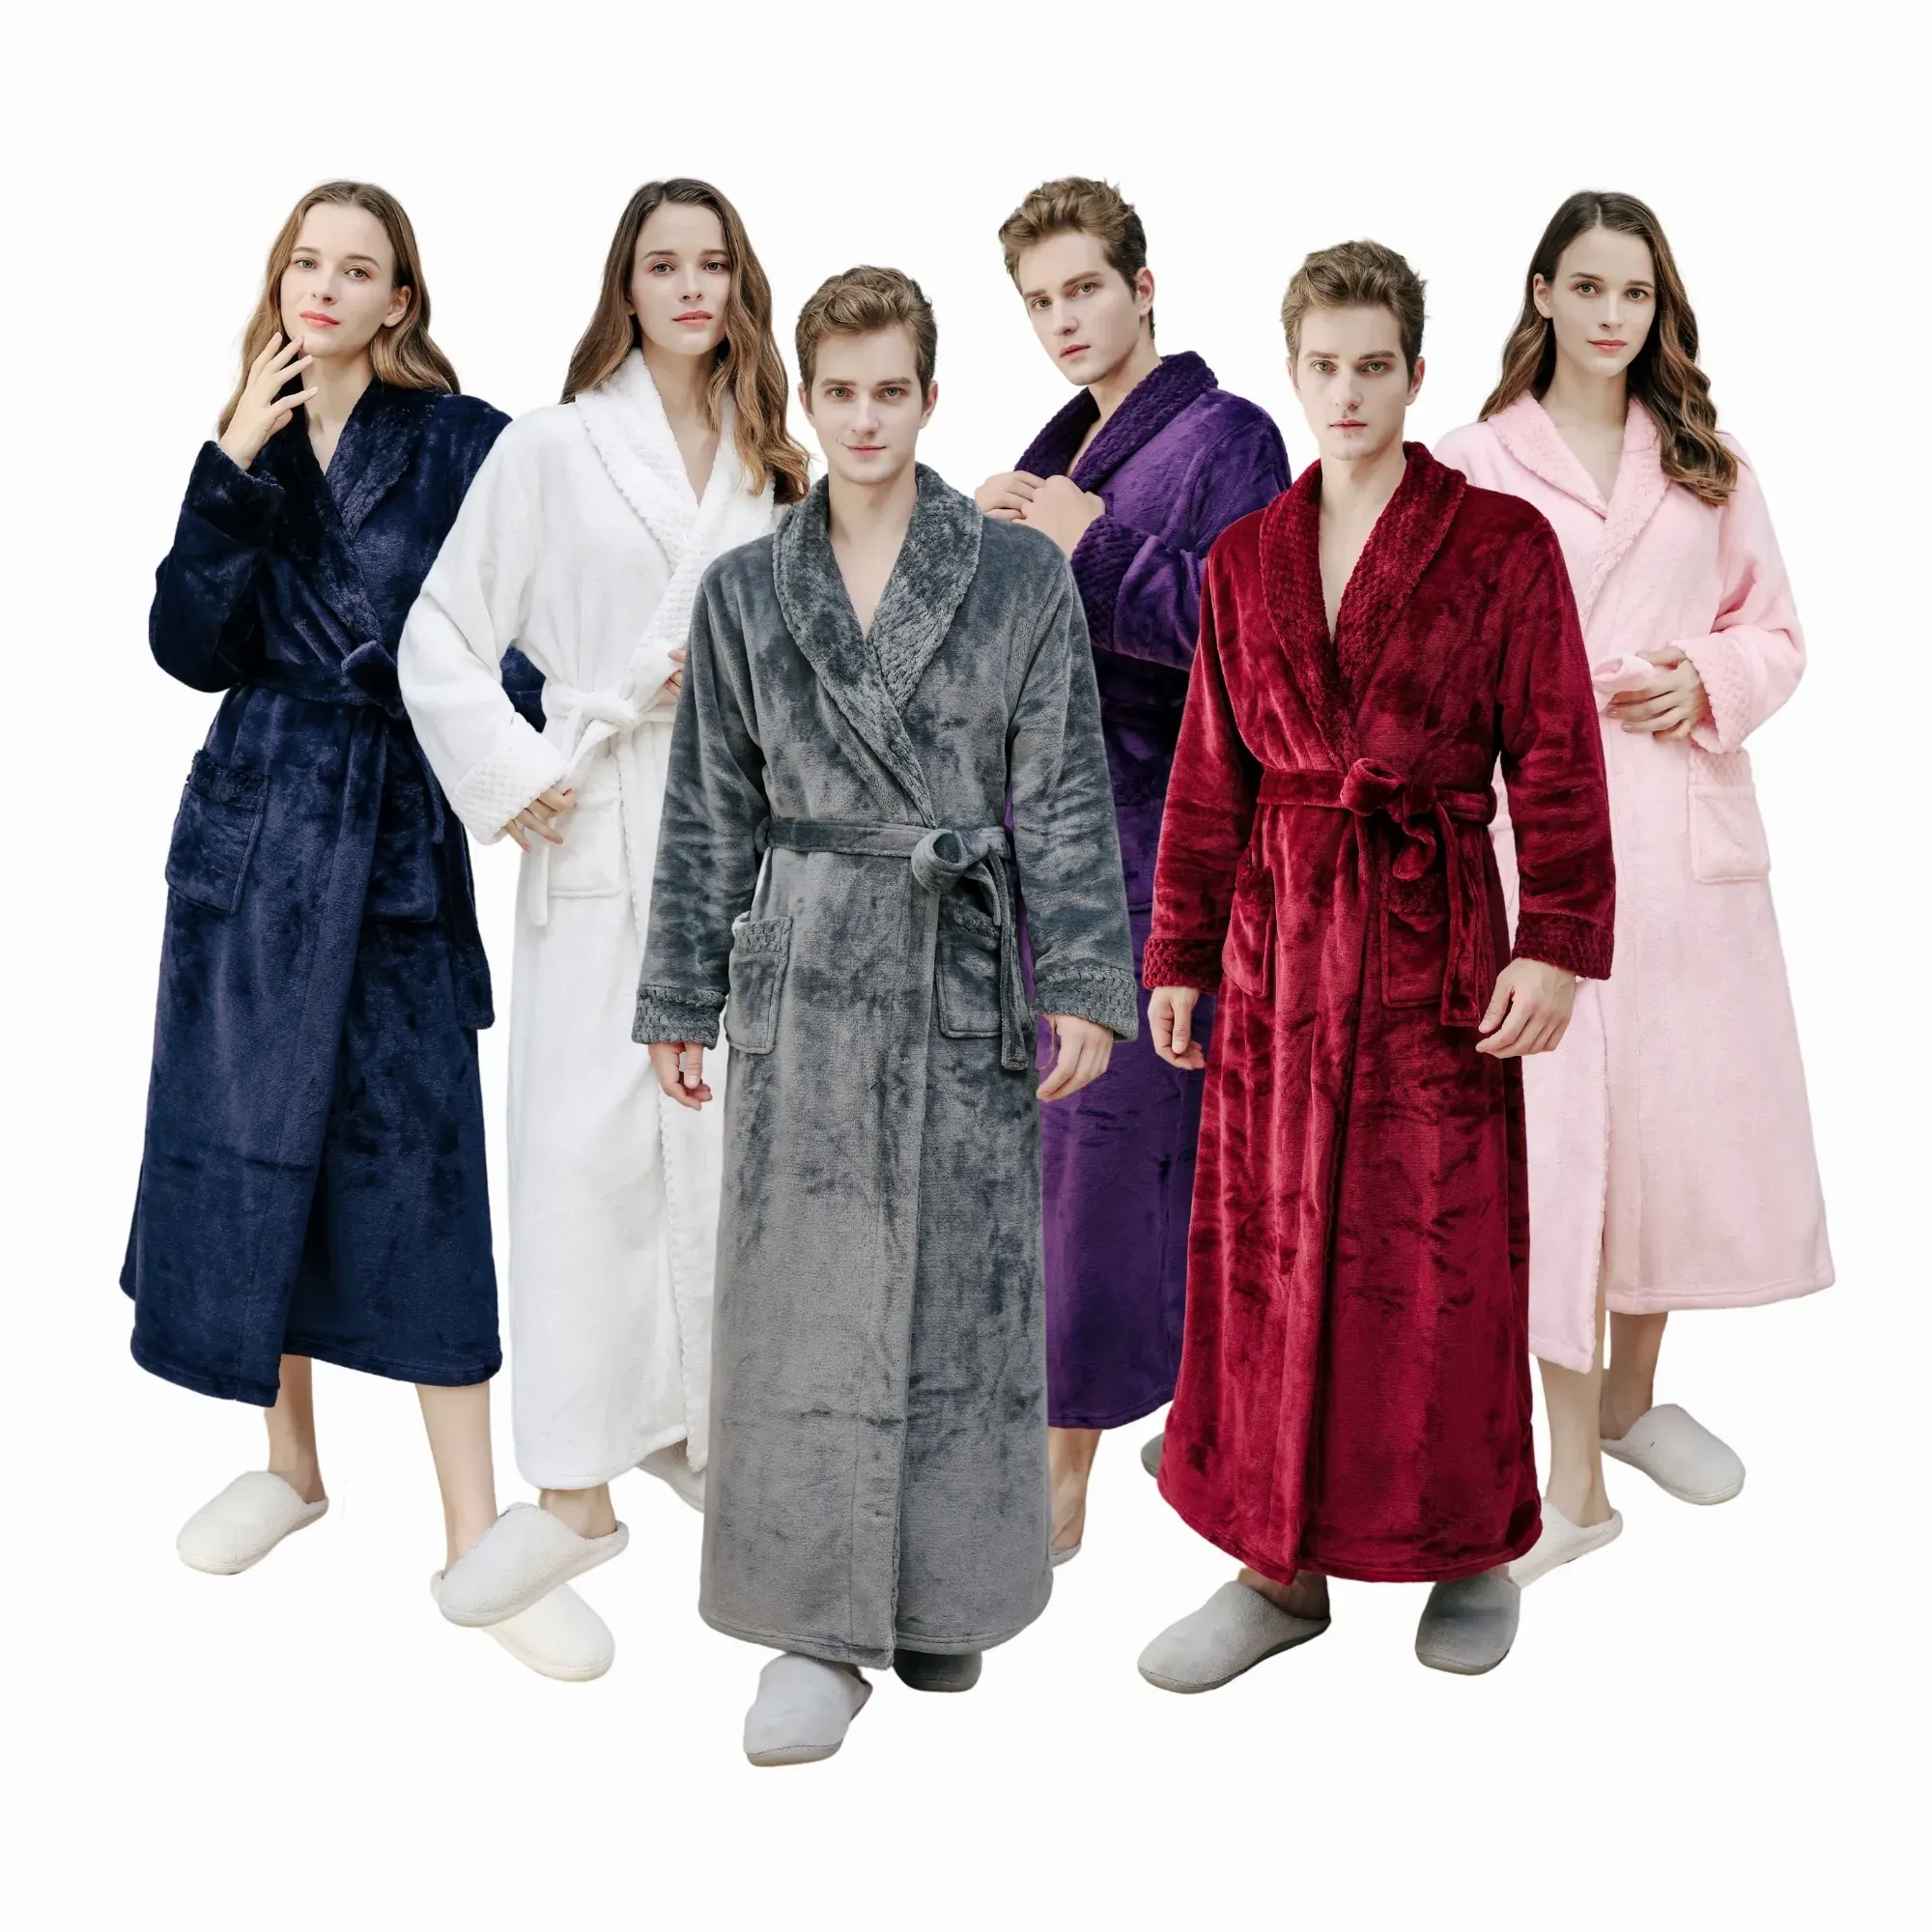 Robes - TradeShowToday